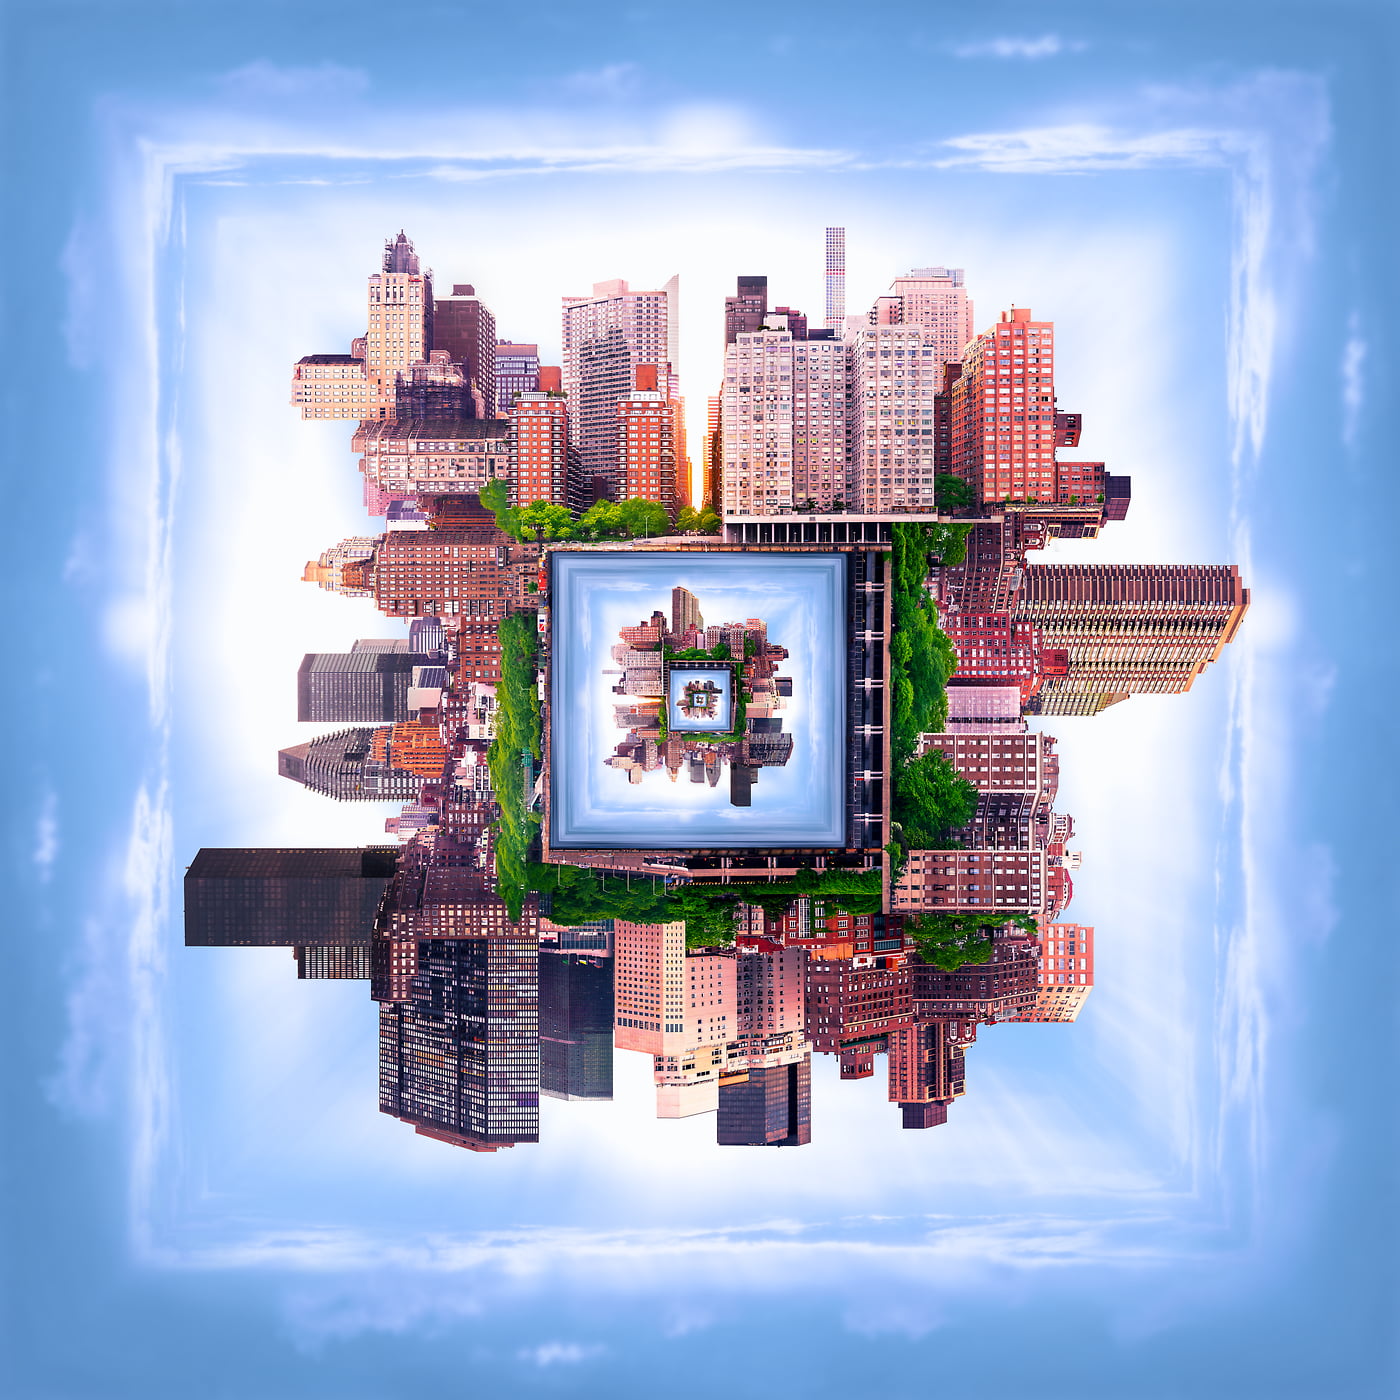 2,204 megapixels! A very high resolution, large-format VAST photo print of a surreal city in a square shape; artistic fine art skyline photograph created by Dan Piech in Midtown East, Manhattan, New York City.